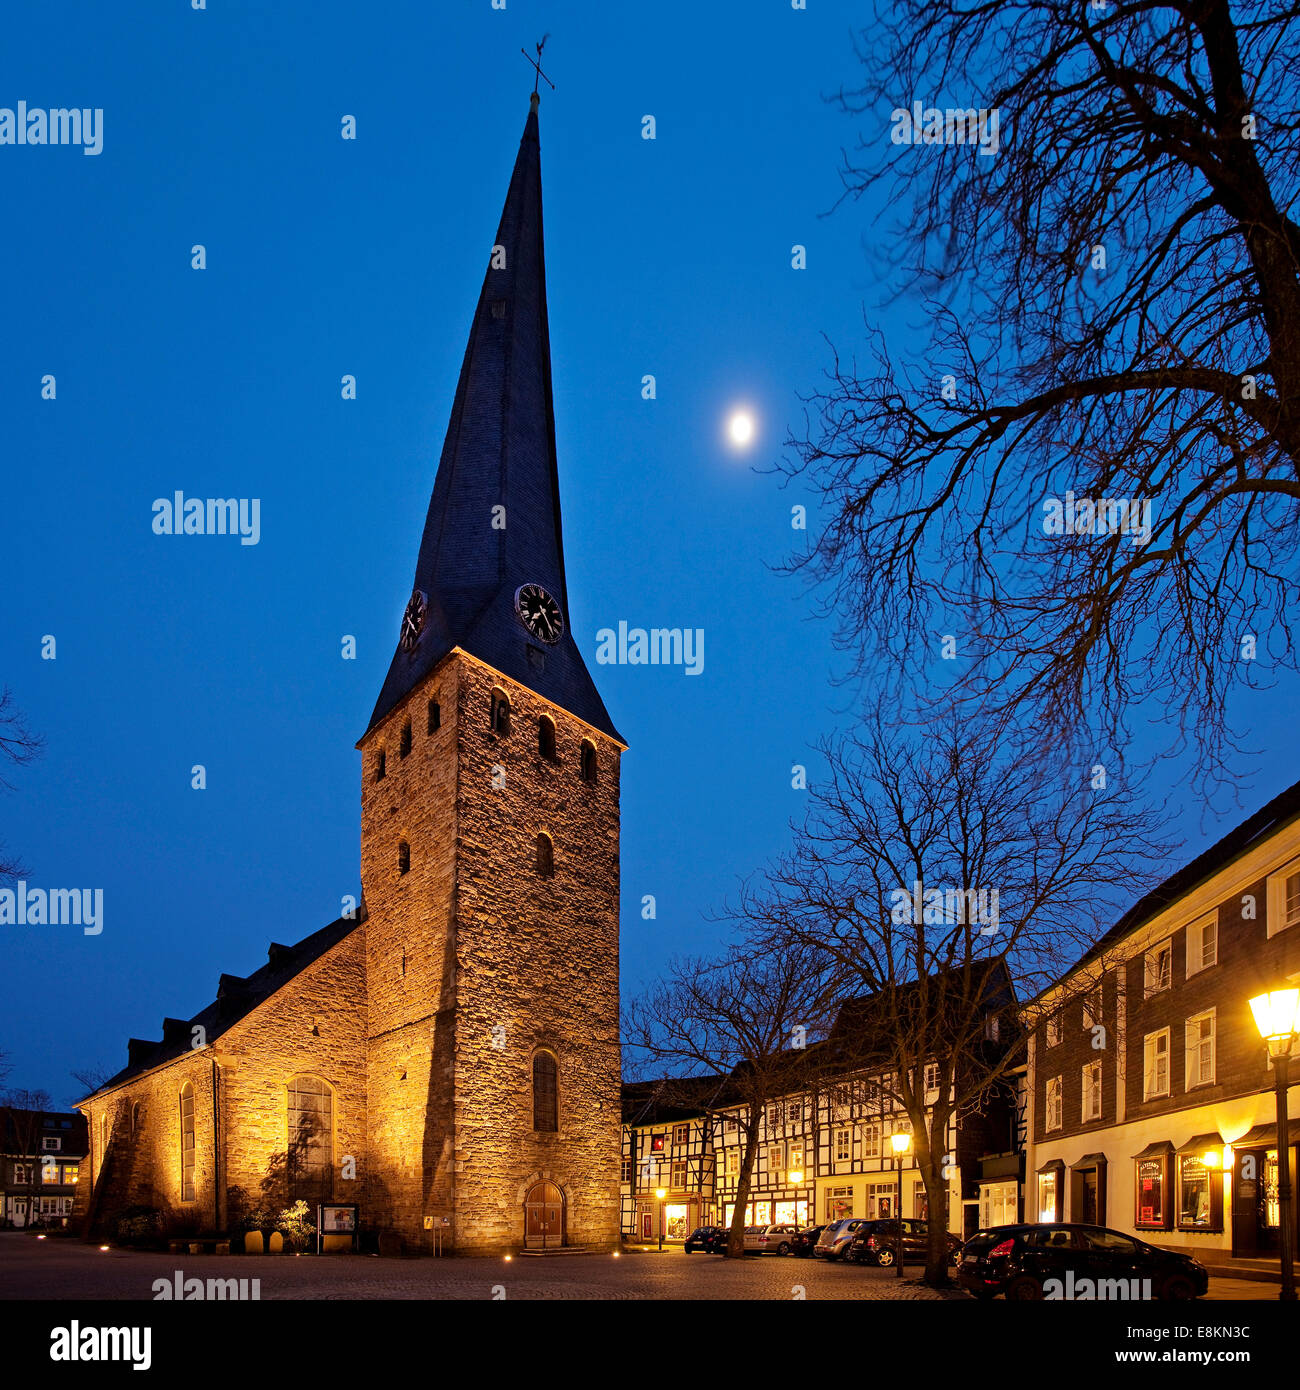 St. George's Church with leaning tower in the historic centre at dusk, Hattingen, Ruhr district, North Rhine-Westphalia, Germany Stock Photo